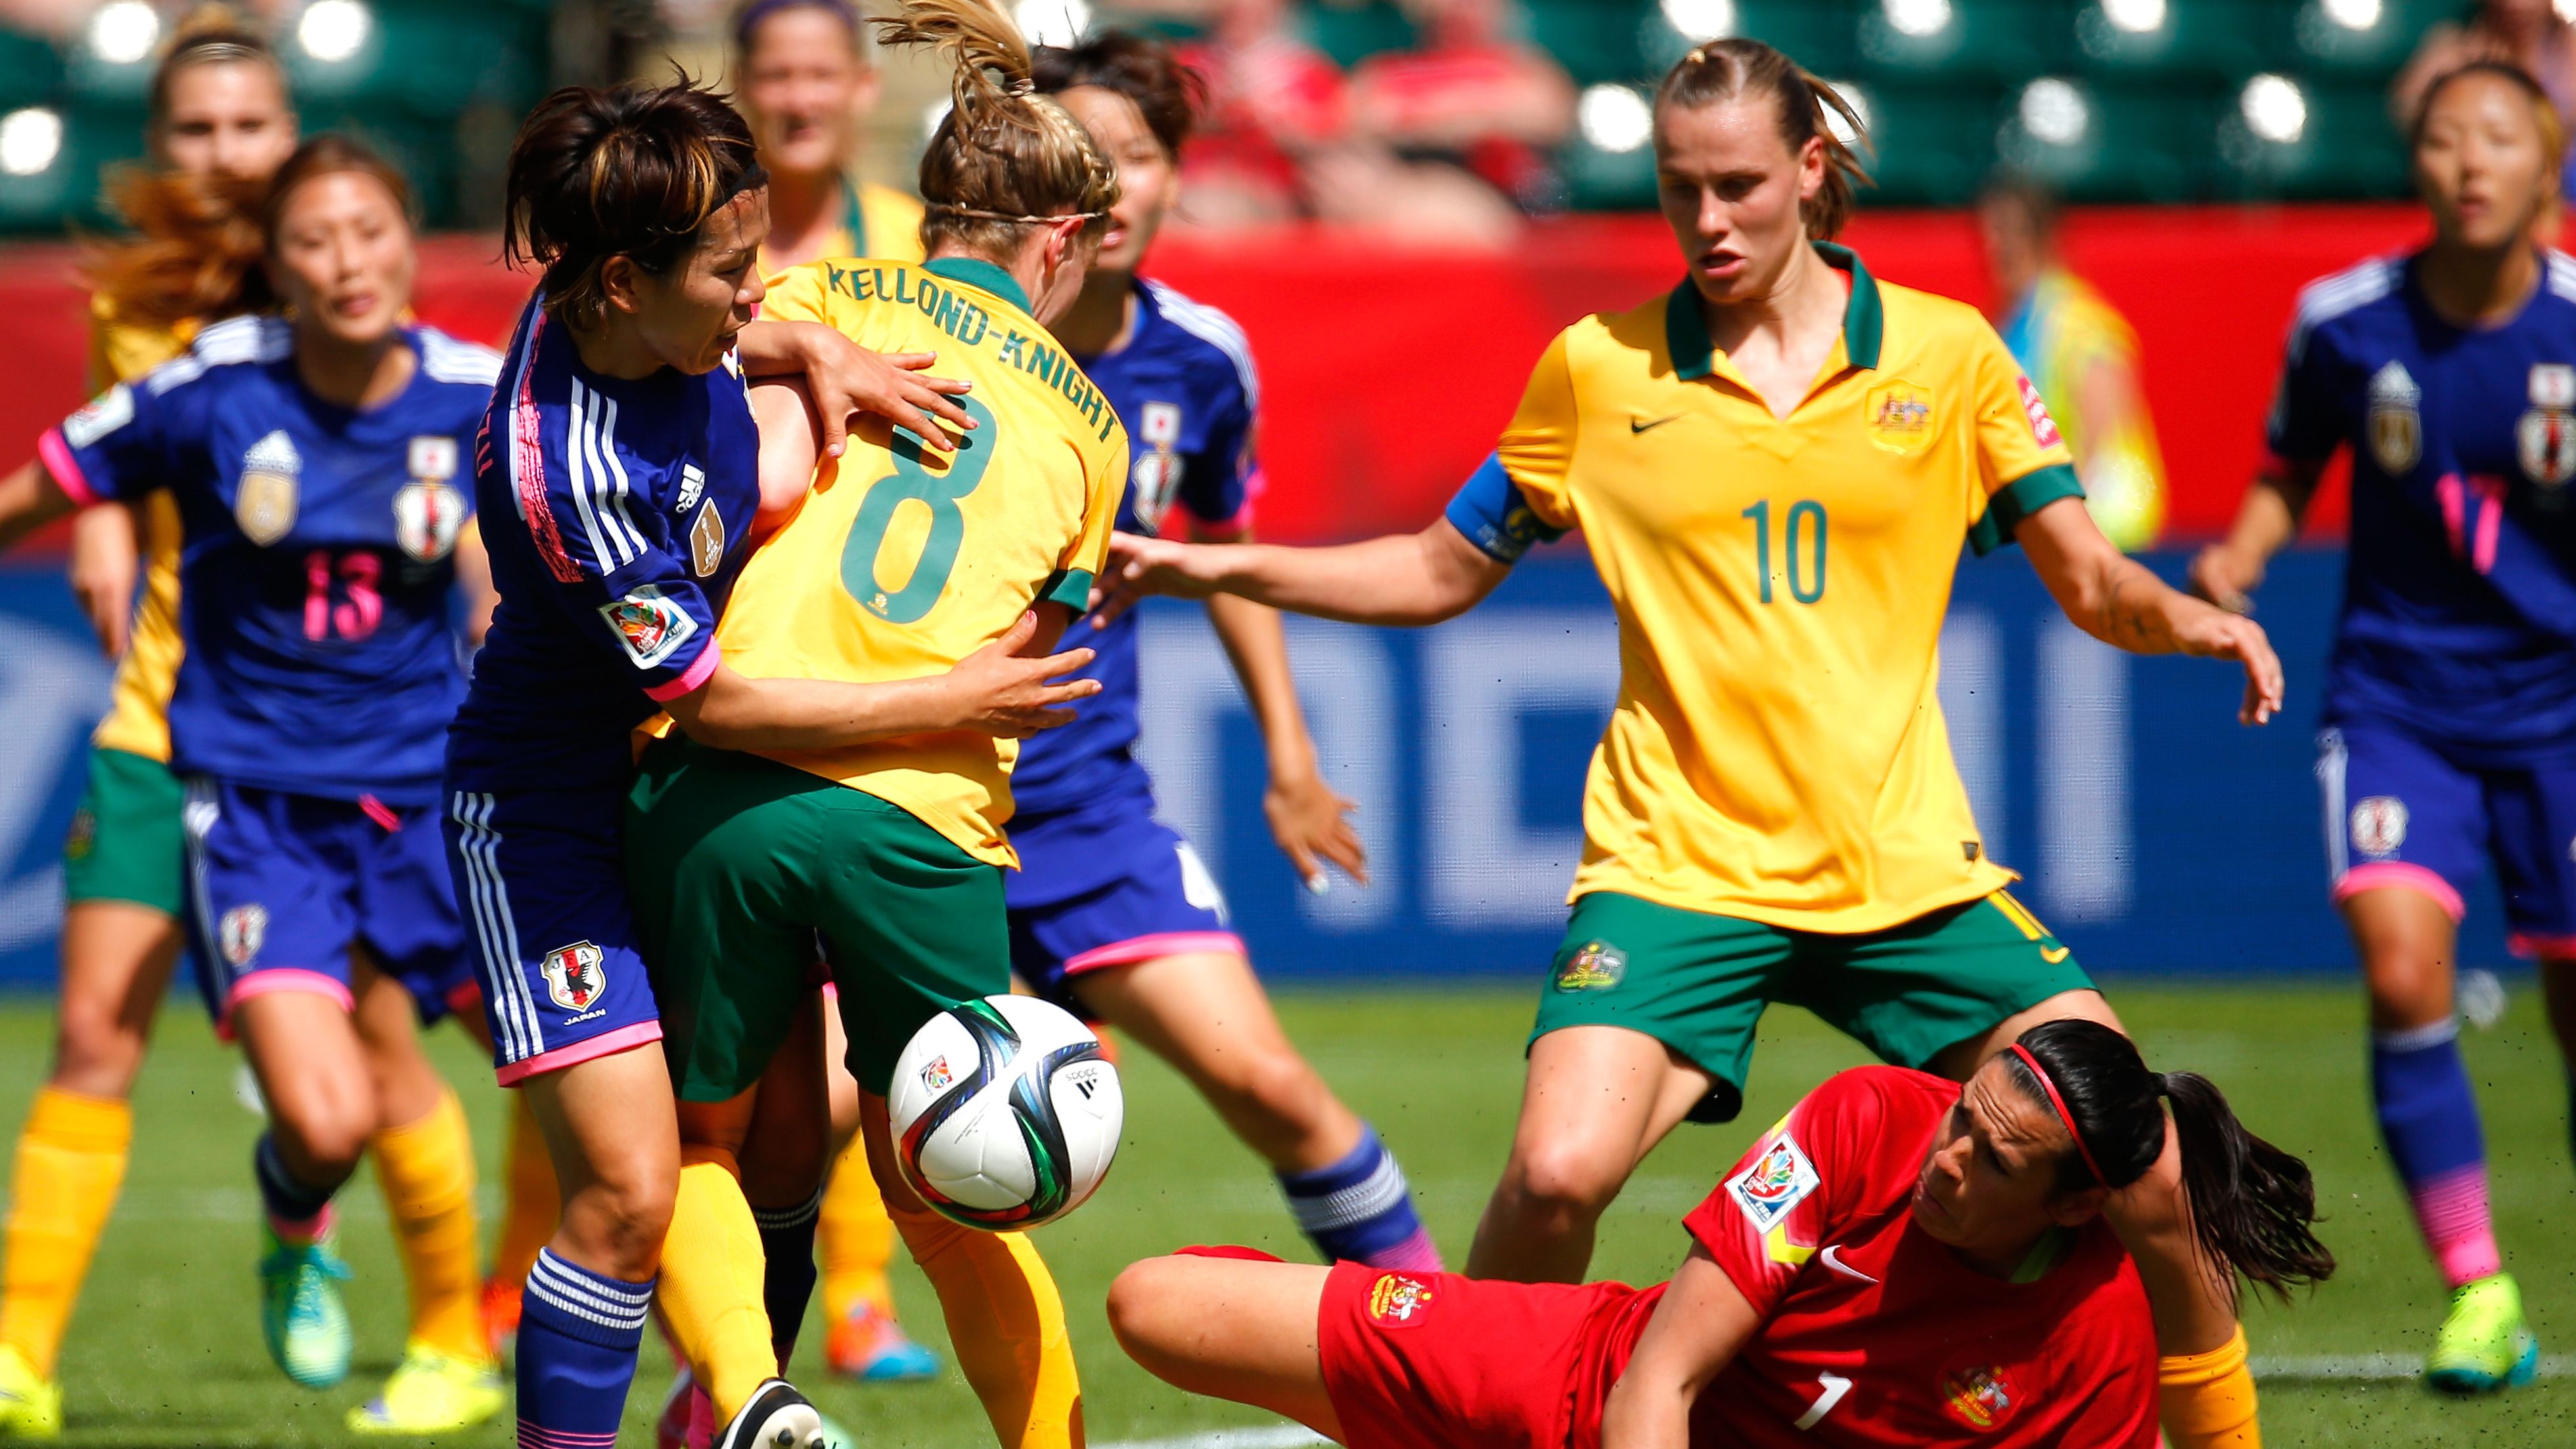 Australia play Japan in the quarterfinals of the Women's World Cup in June this year.